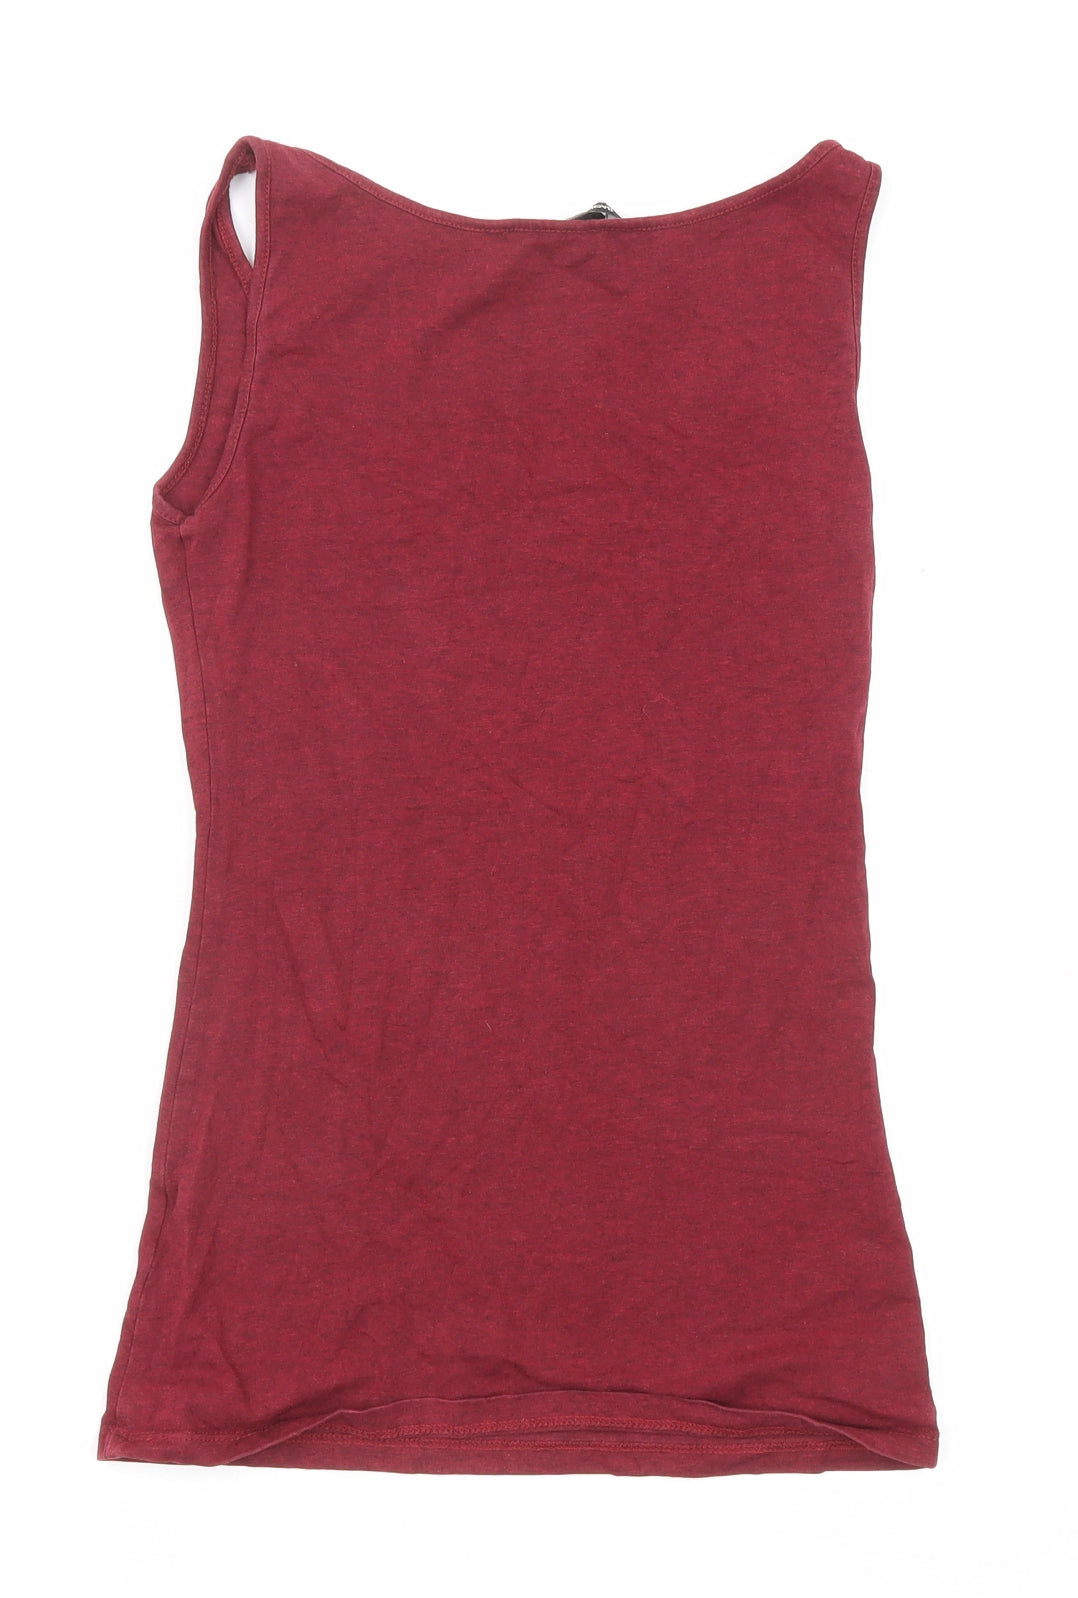 H&M Womens Red Cotton Basic Tank Size XS Scoop Neck